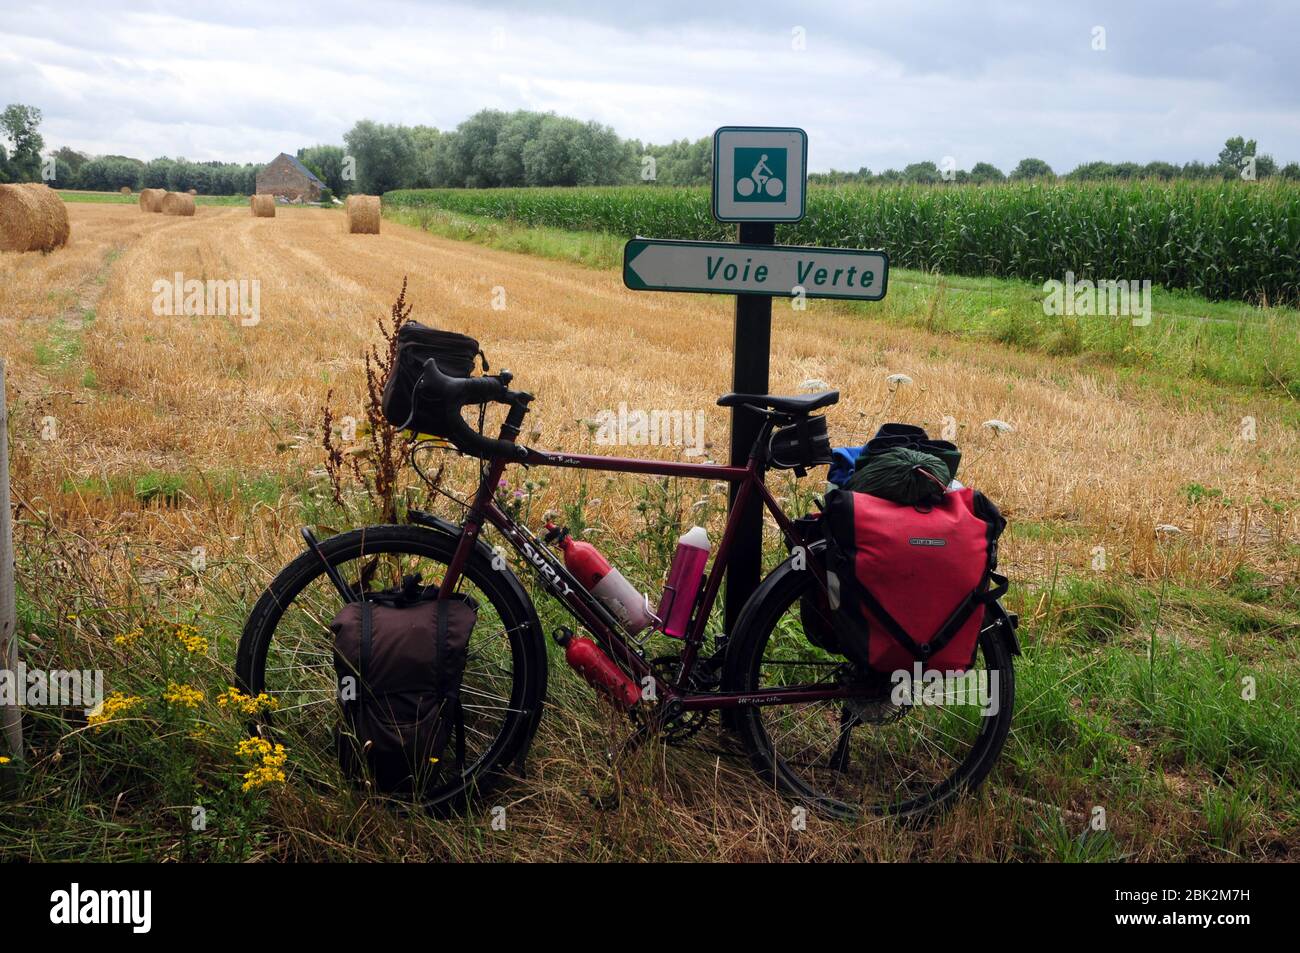 Cycle leaning against a sign for the 'Voie Verte' or 'Green Way' a network of waymarked quiet cycle routes in France Stock Photo